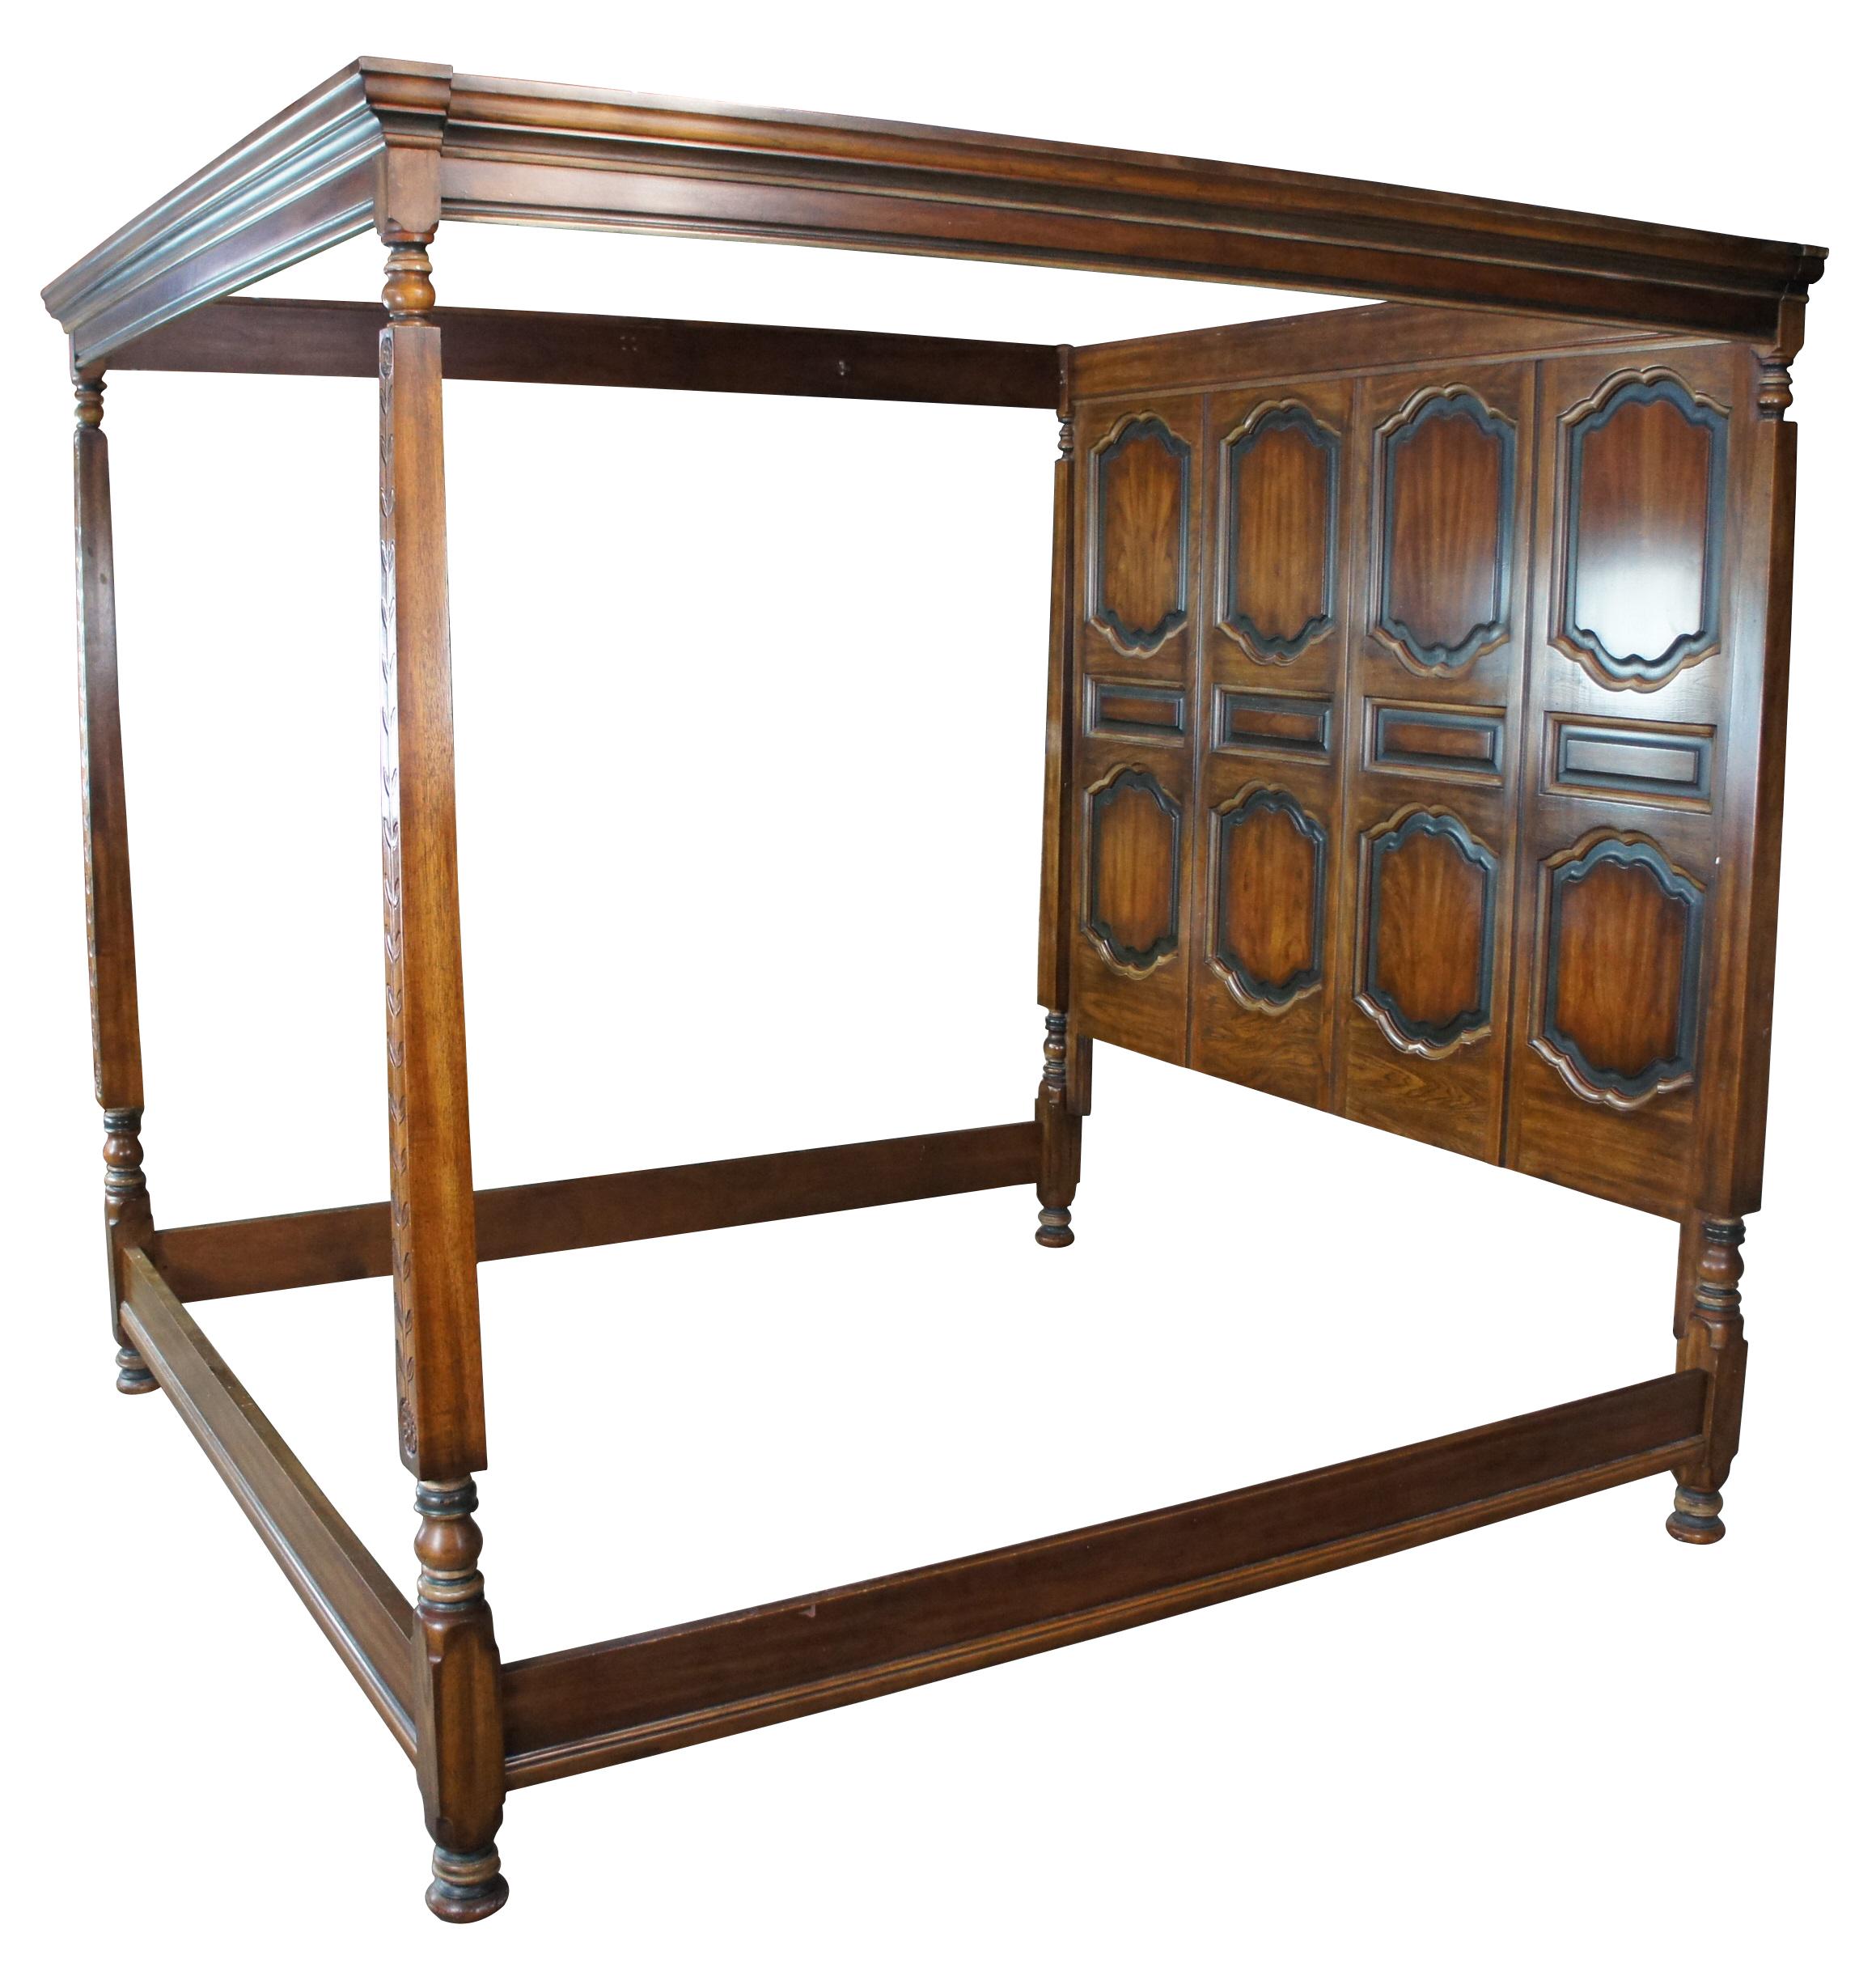 Drexel Heritage Brittany Collection King size canopy bed, circa 1980s. Features an oak frame with Panelled backing, square tapered sunflower carved posts and bun feet. Trimmed with green accents, 202-581-1

Measures: 83